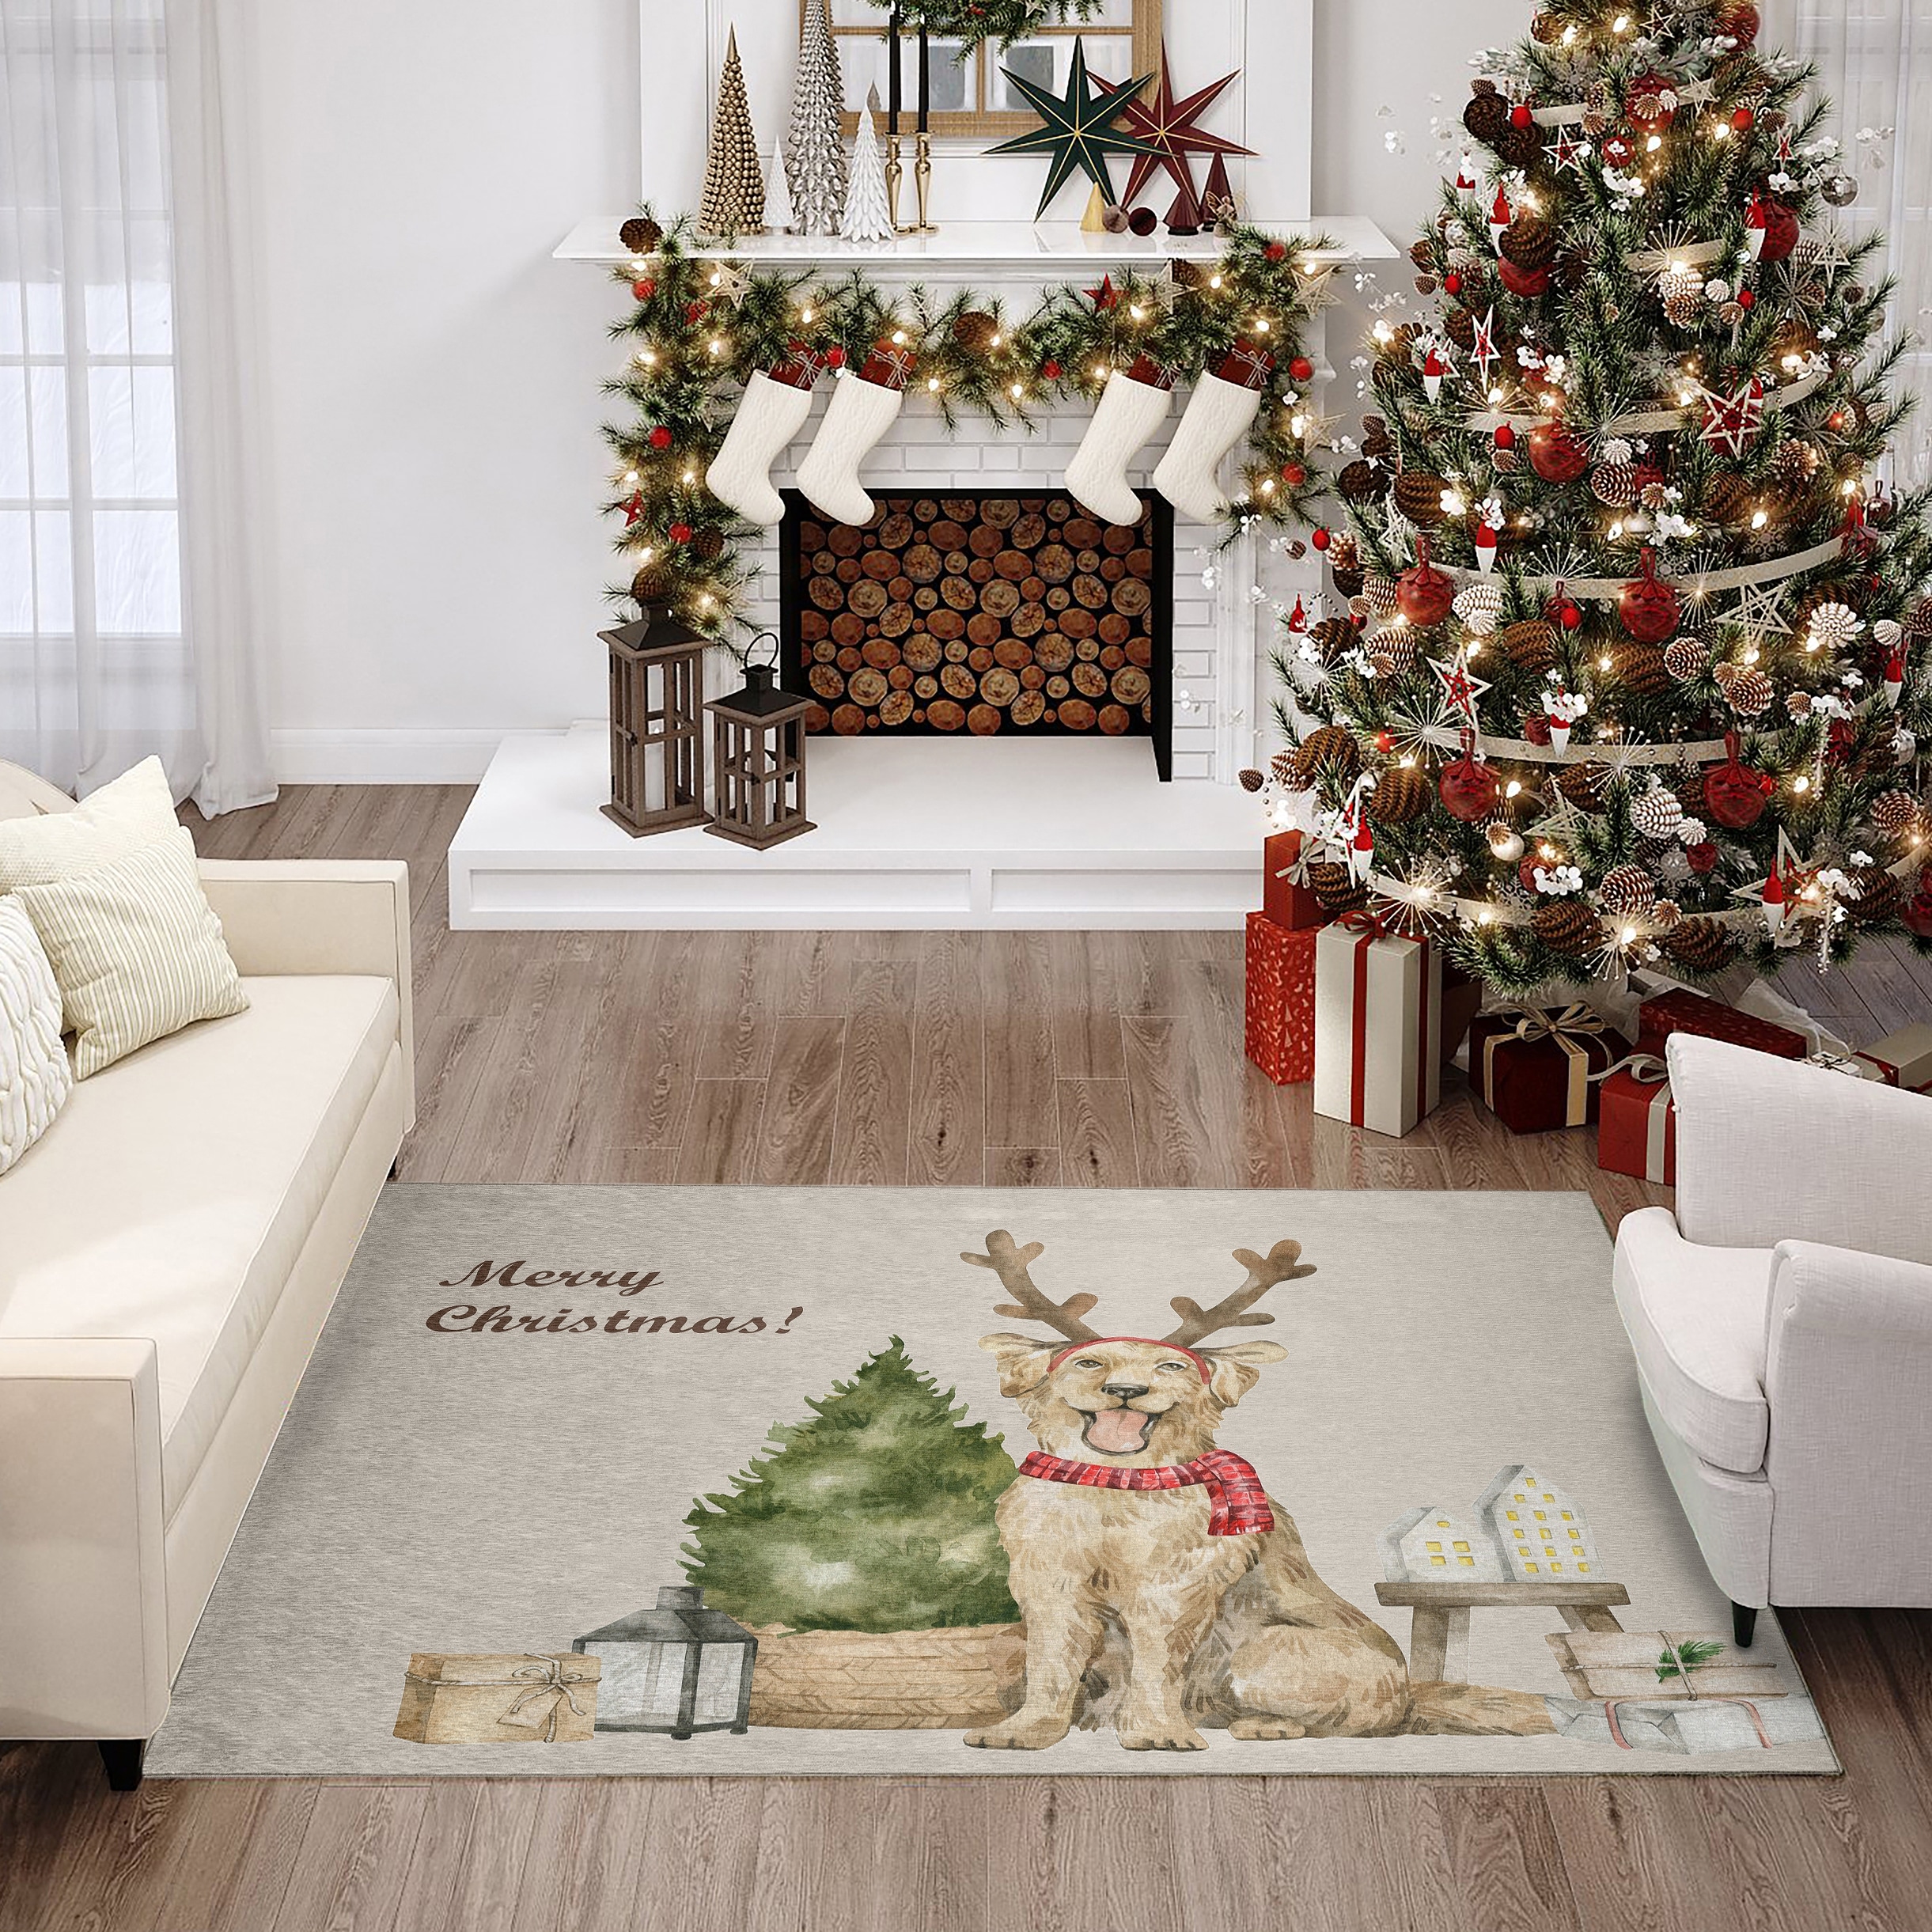 Addison Rugs Indoor/Outdoor Cozy Winter ACW38 Taupe Washable 1'8 x 2'6 Rug